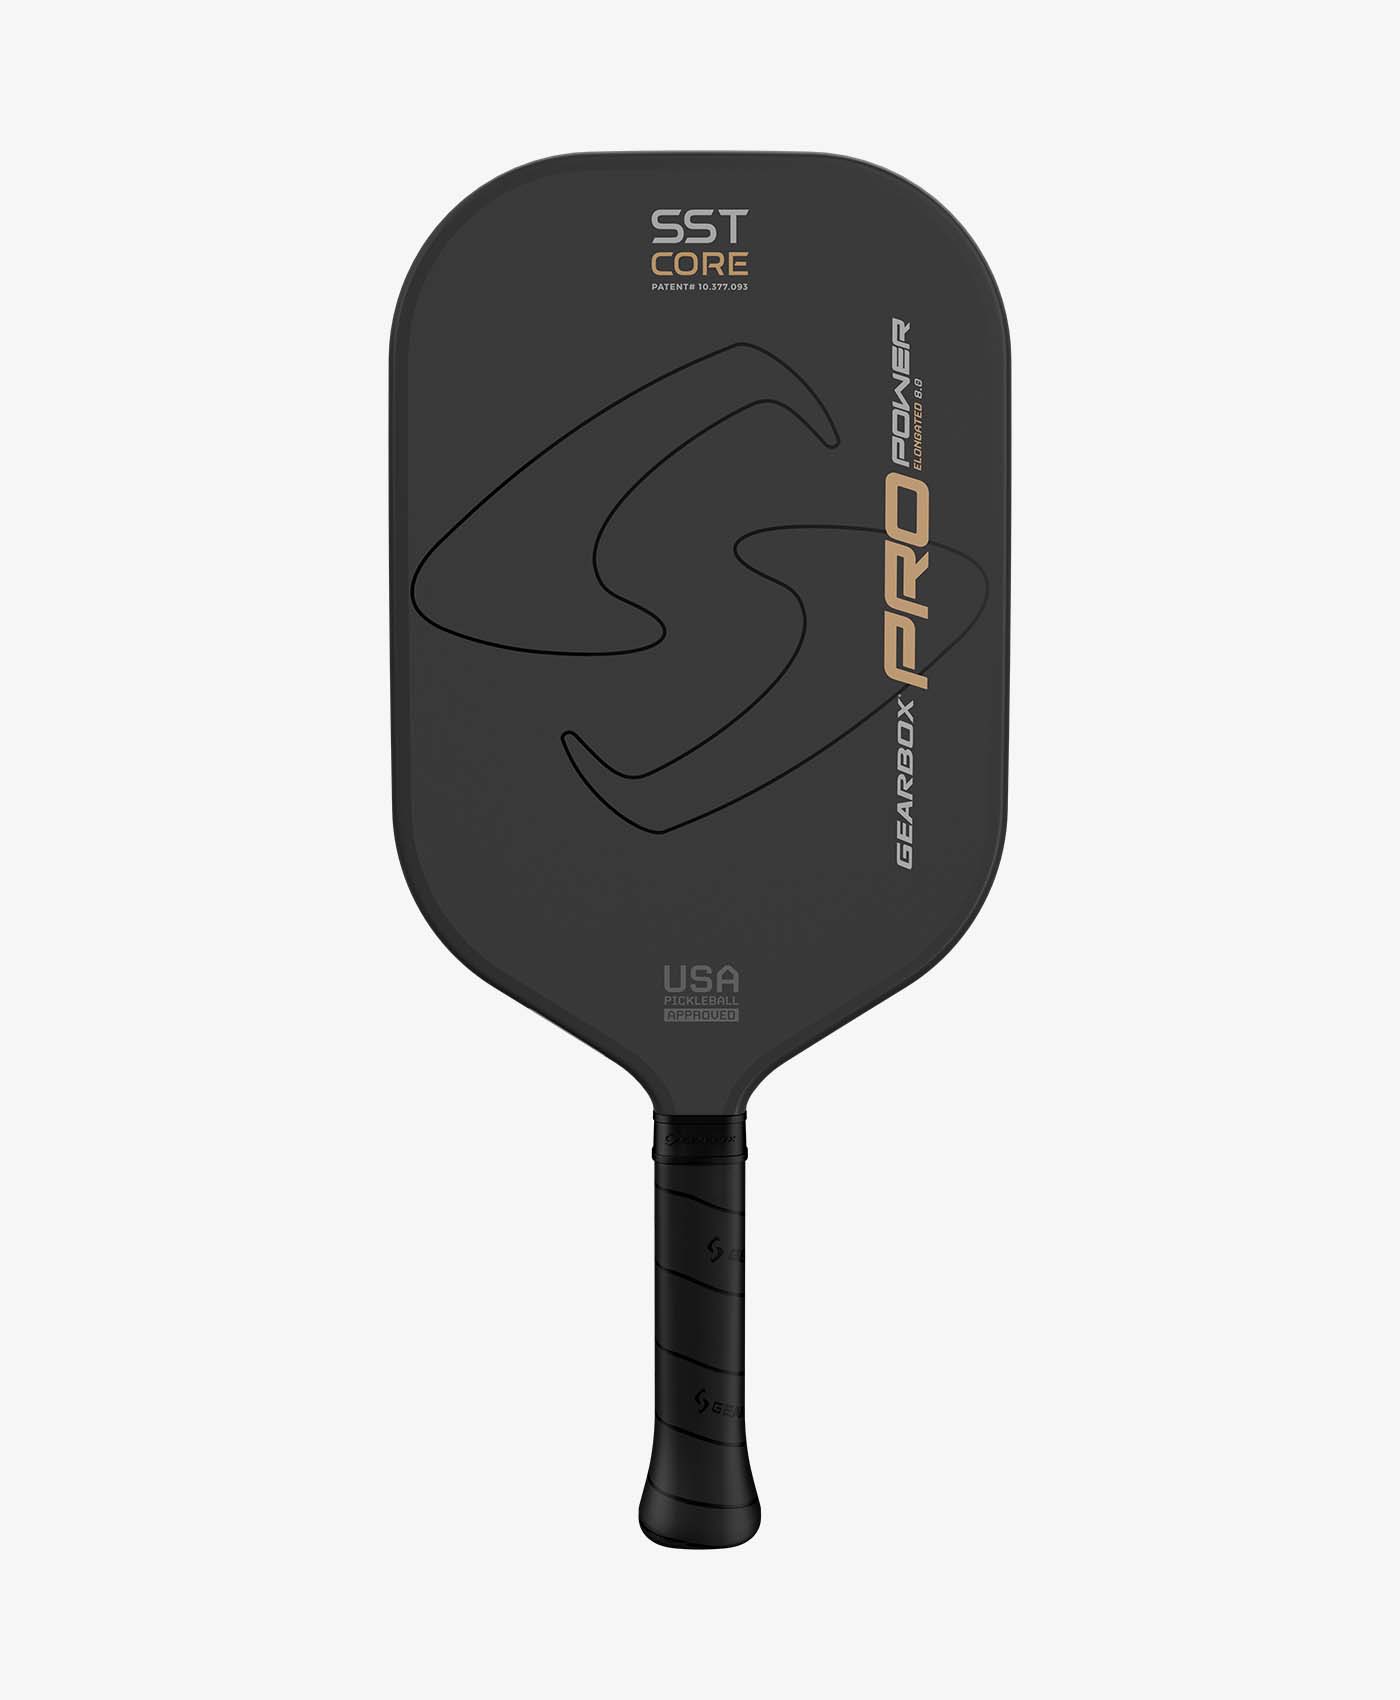 A black and gold Gearbox Pro Power Elongated Pickleball Paddle on a white background with a Gearbox patent.